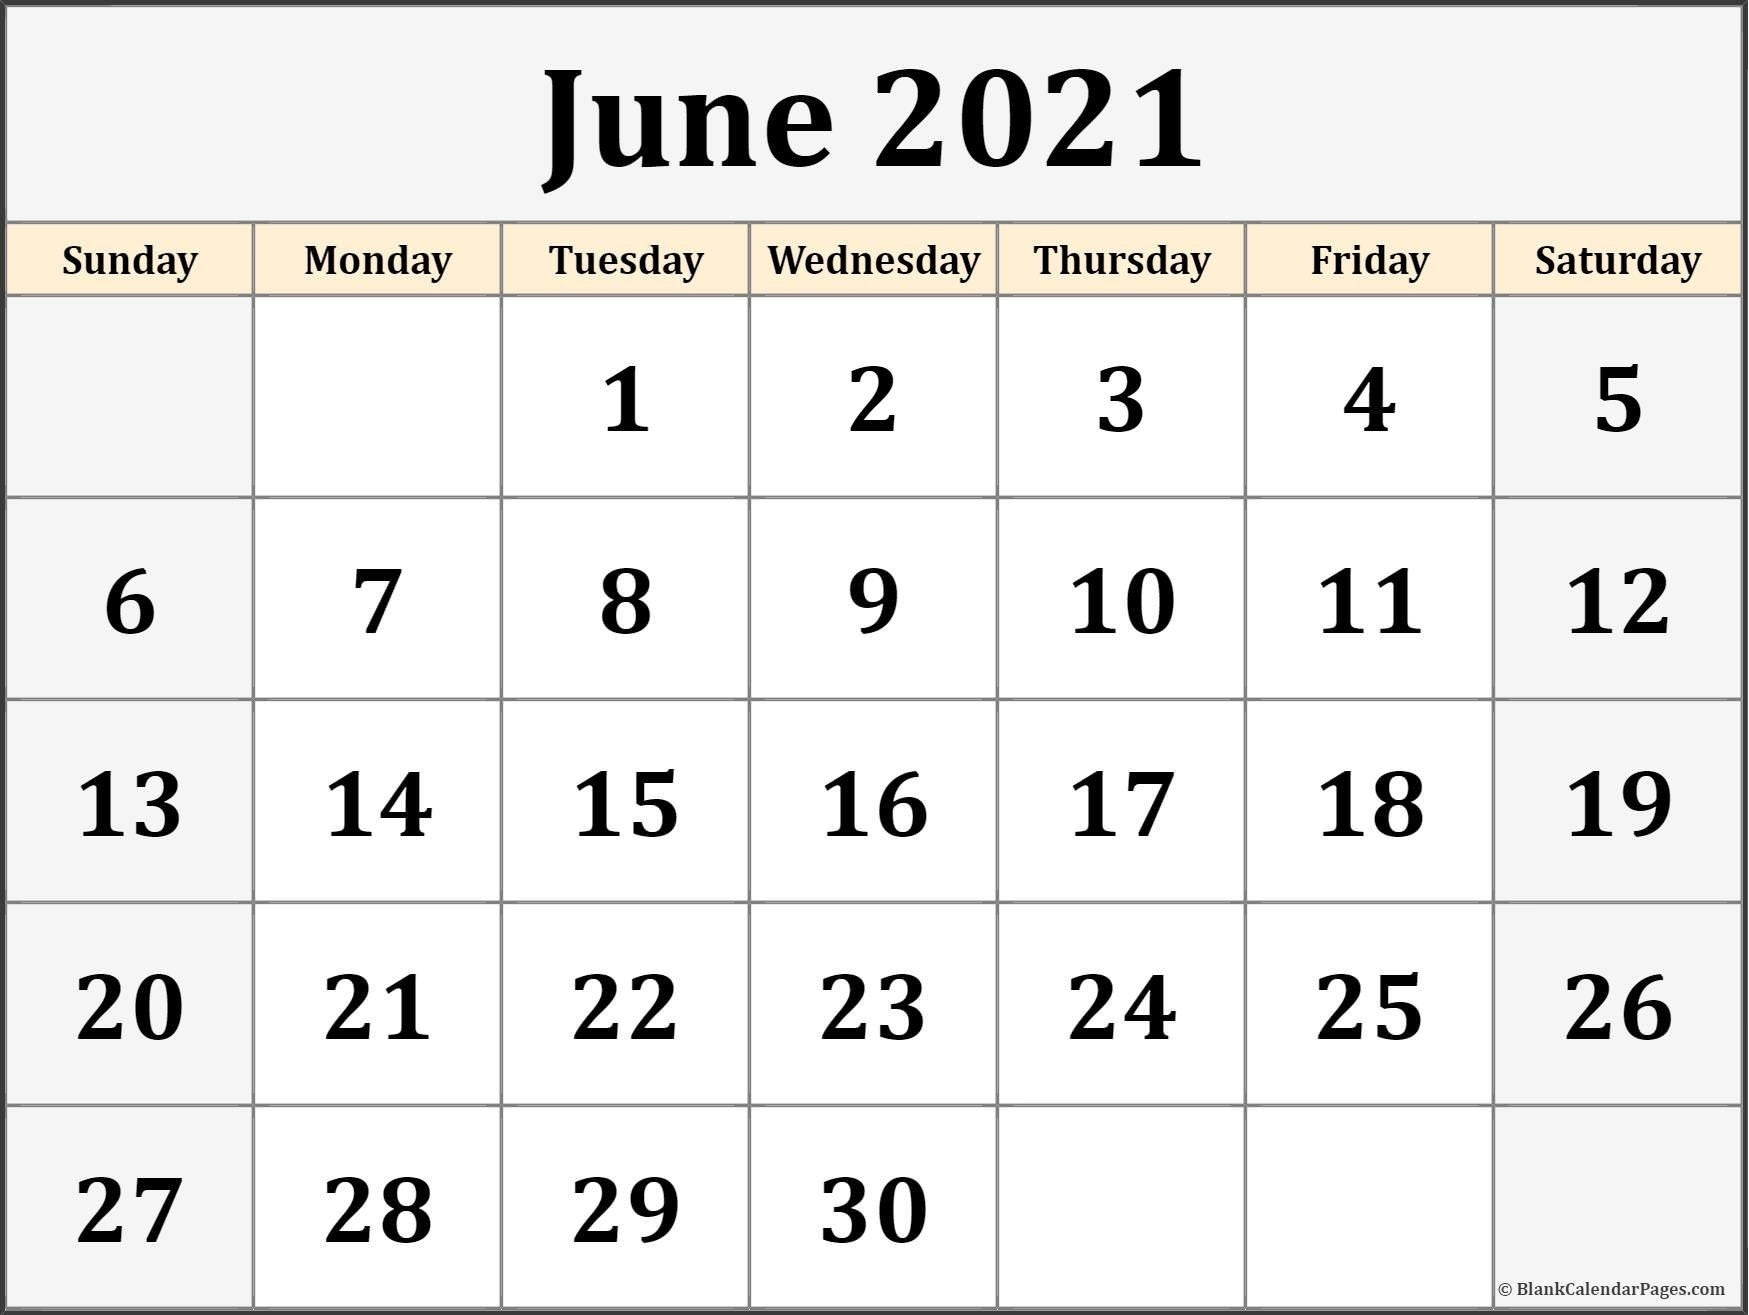 Editable June 2021 Calendar - Calendar 2020 June 2021 Calendar Template Excel